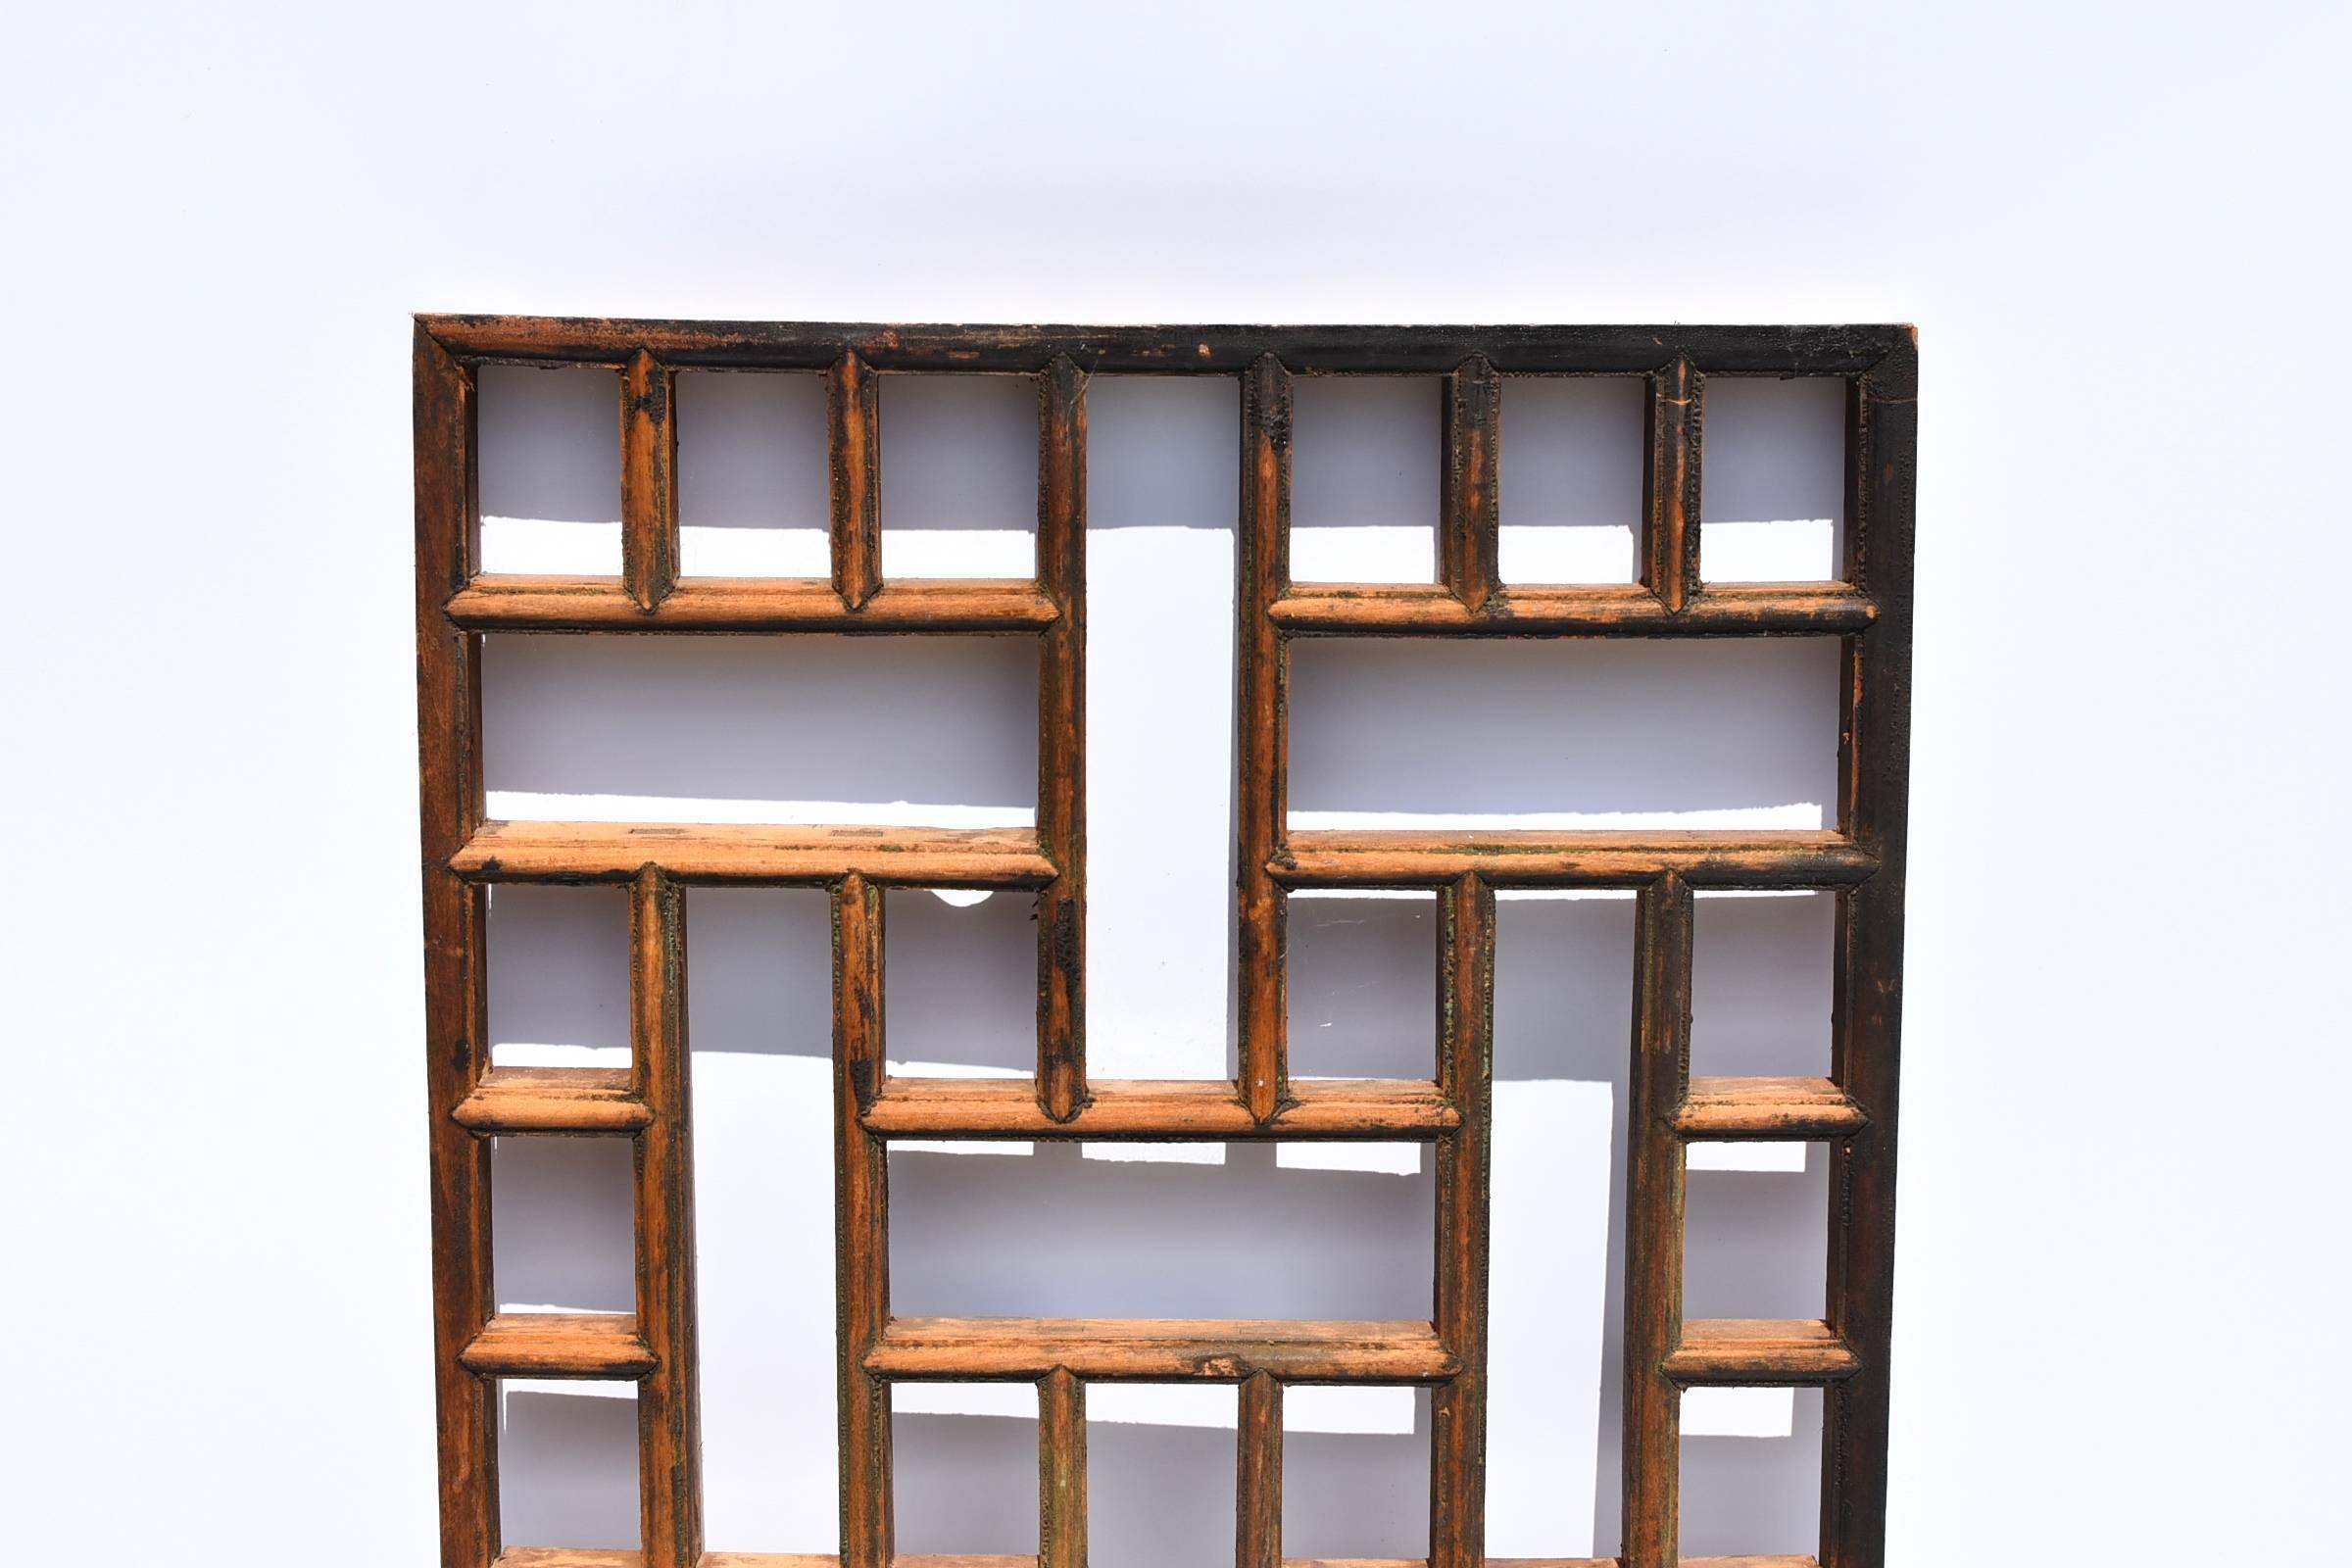 A 19th century screen with geometric design. 

The construction is joinery with tenons and mortises. All painstakingly done by hand. This piece makes a modern wall decoration besides being a screen.

Solid wood.